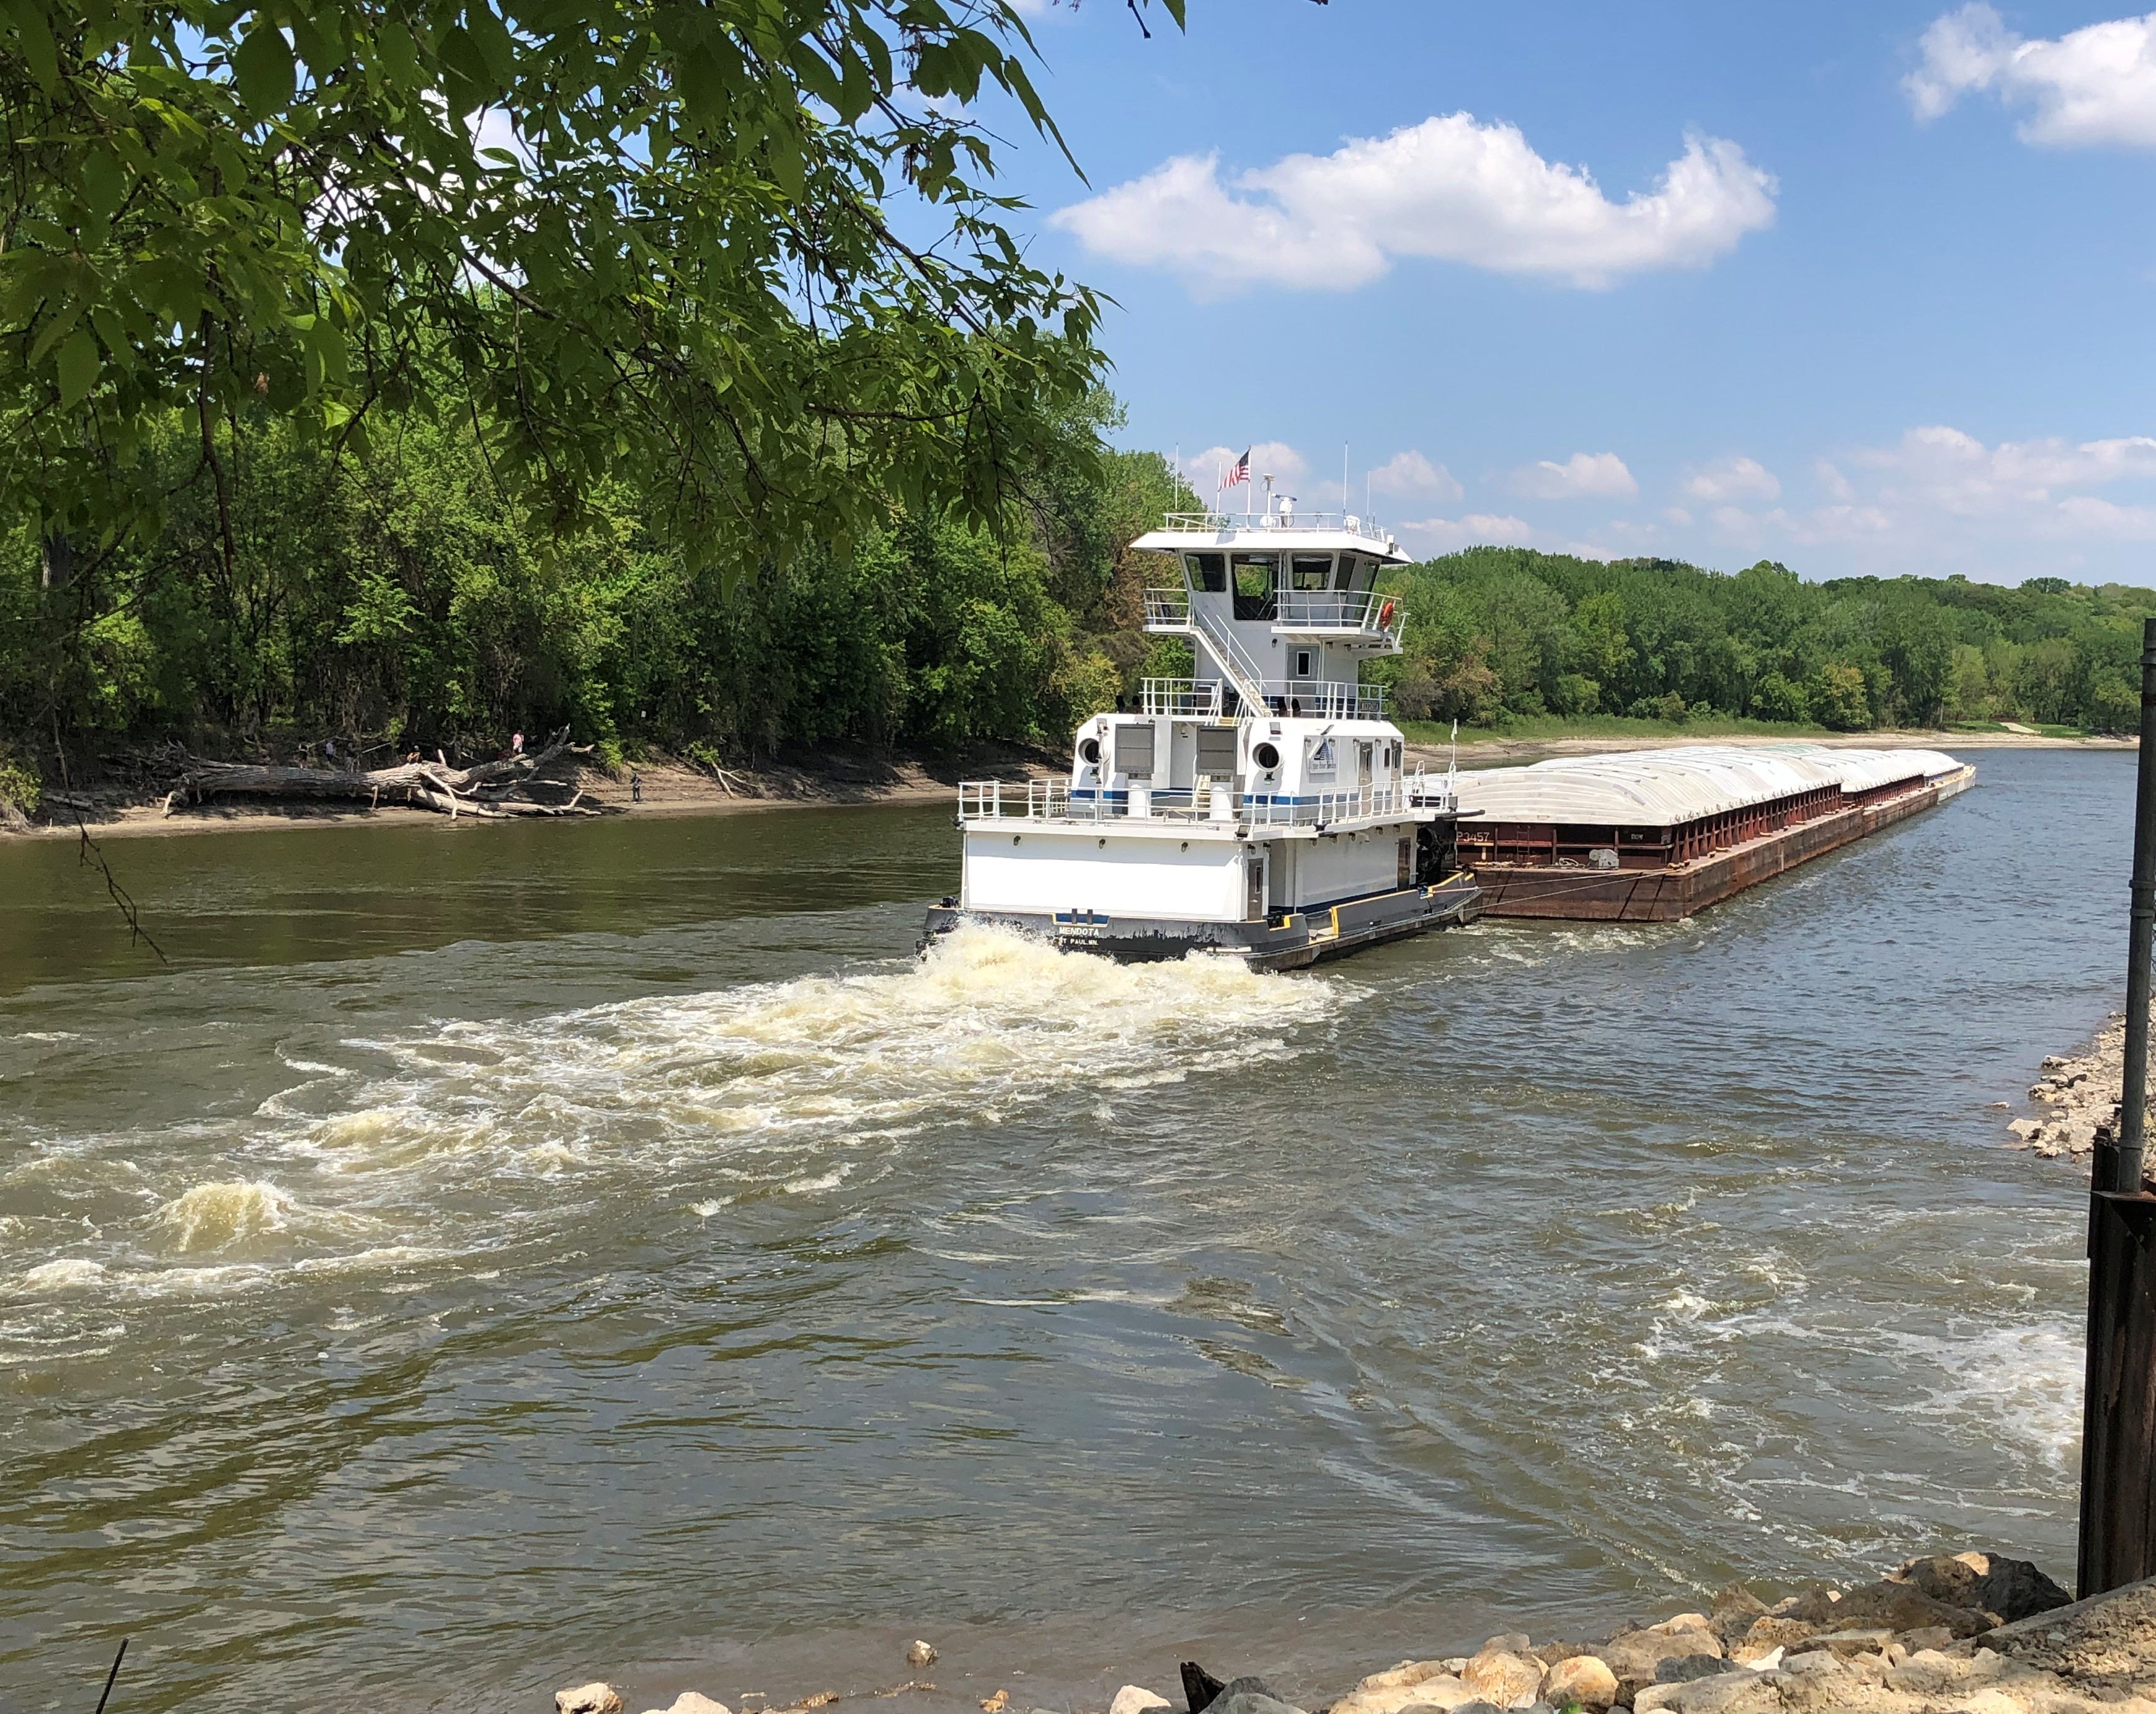 A boat on the Minnesota River